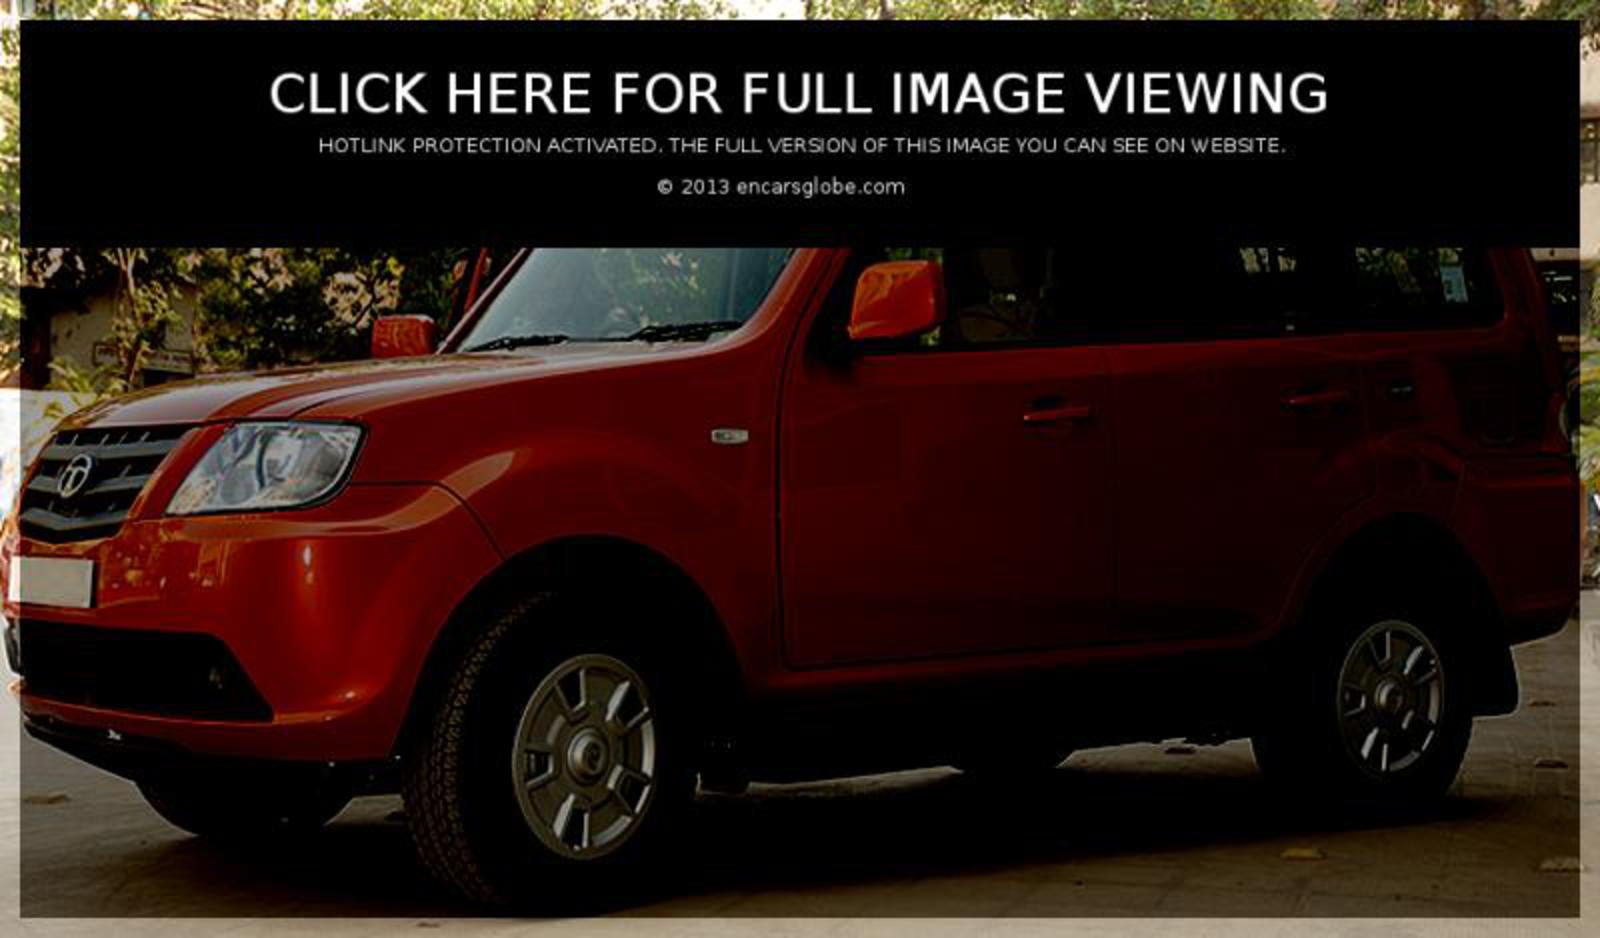 Tata Sumo EX 20 TDi Photo Gallery: Photo #10 out of 11, Image Size ...